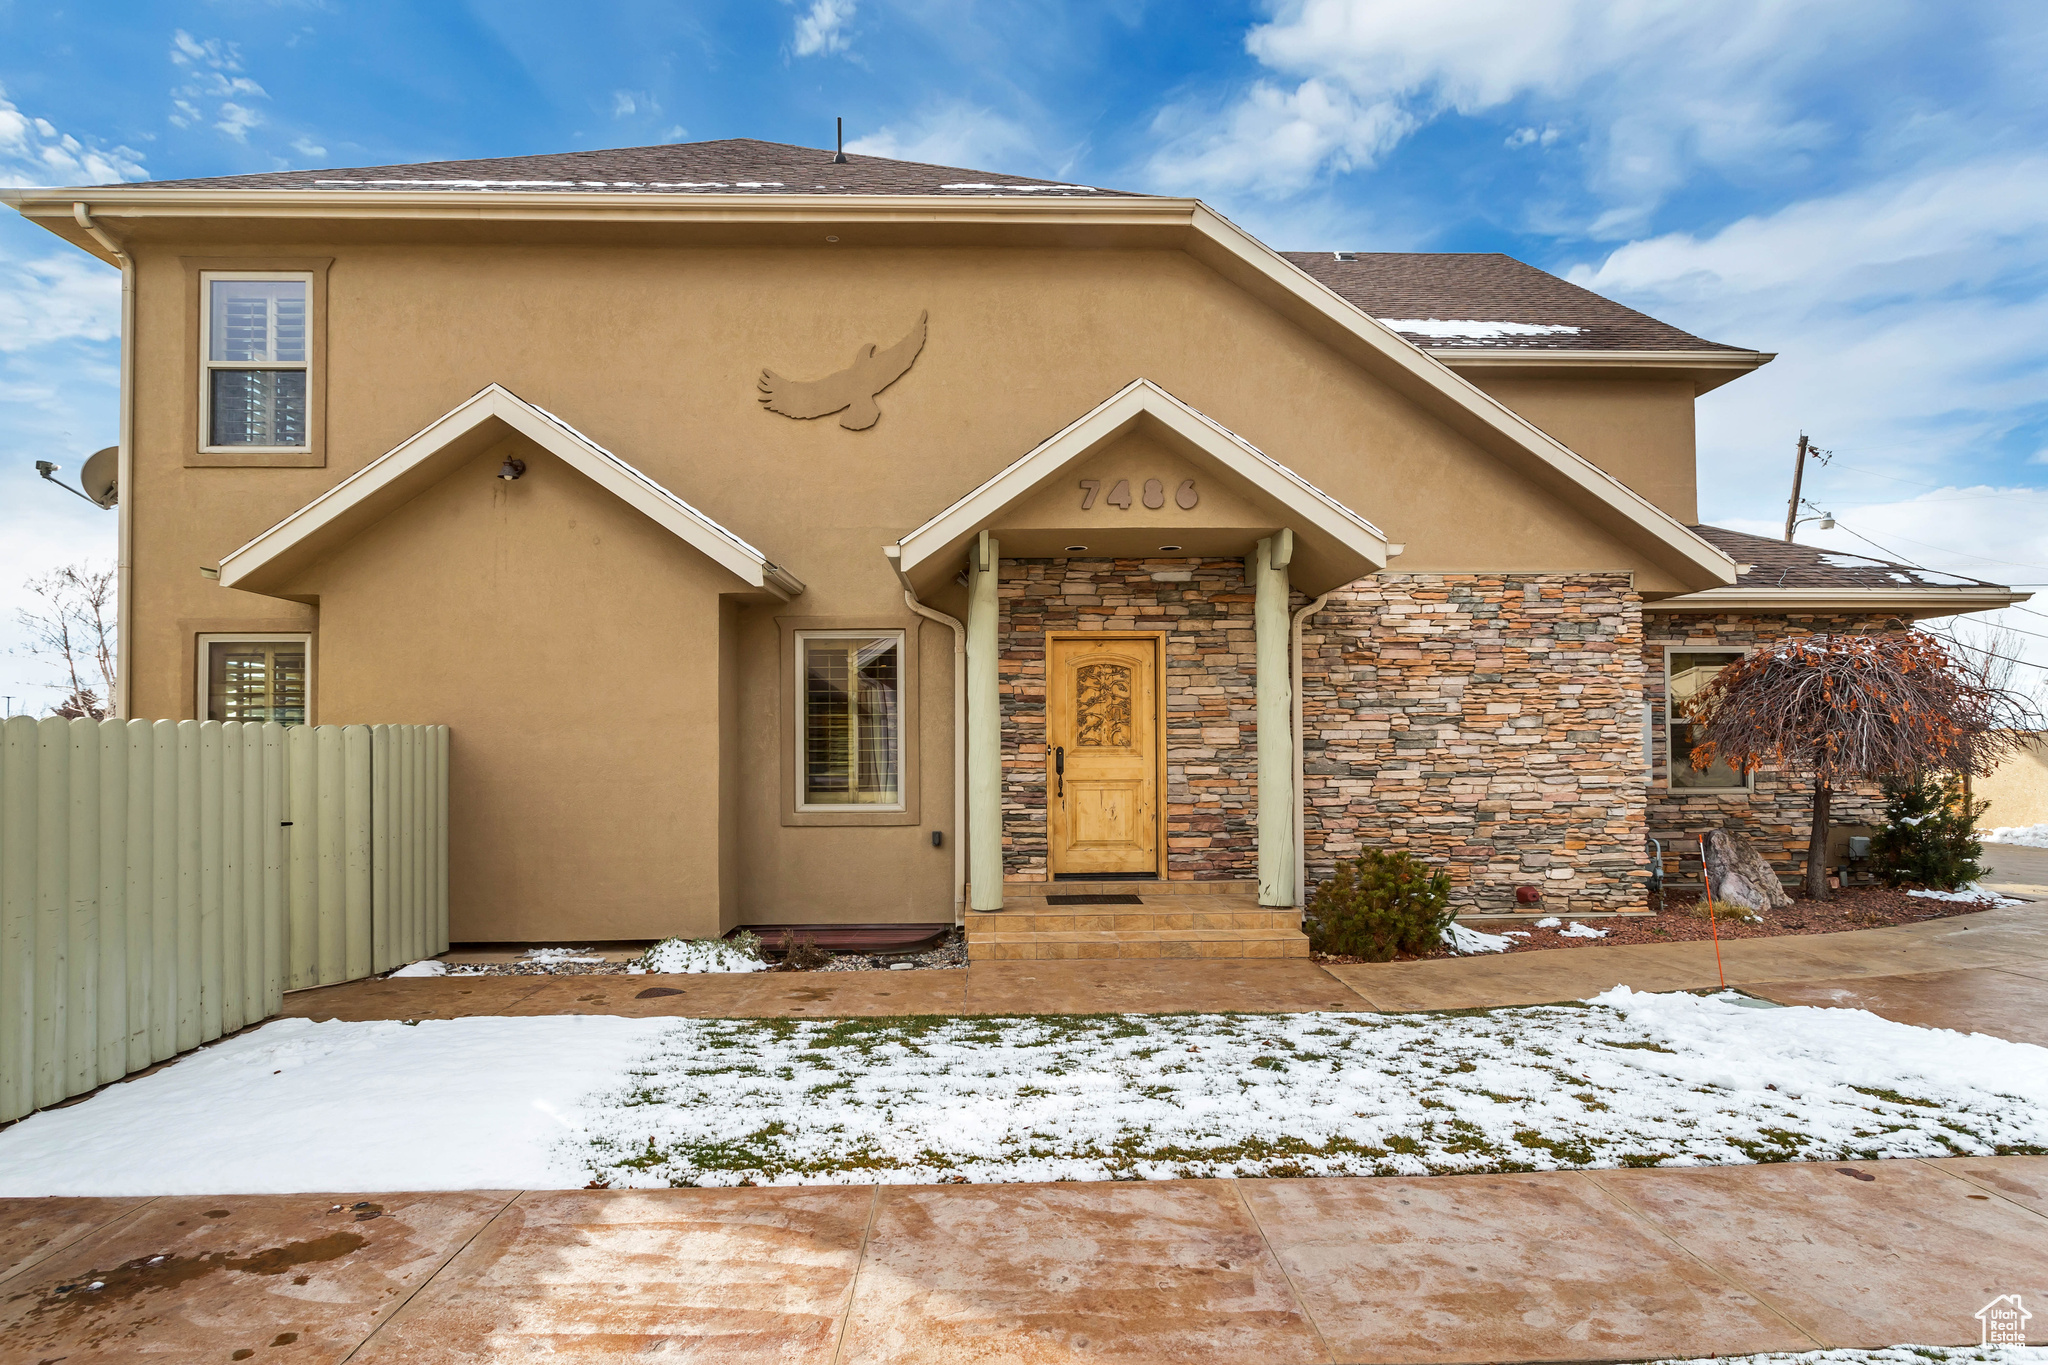 7494 S 2300 E, Cottonwood Heights, Utah 84121, 8 Bedrooms Bedrooms, ,Residential,For sale,2300,1981159